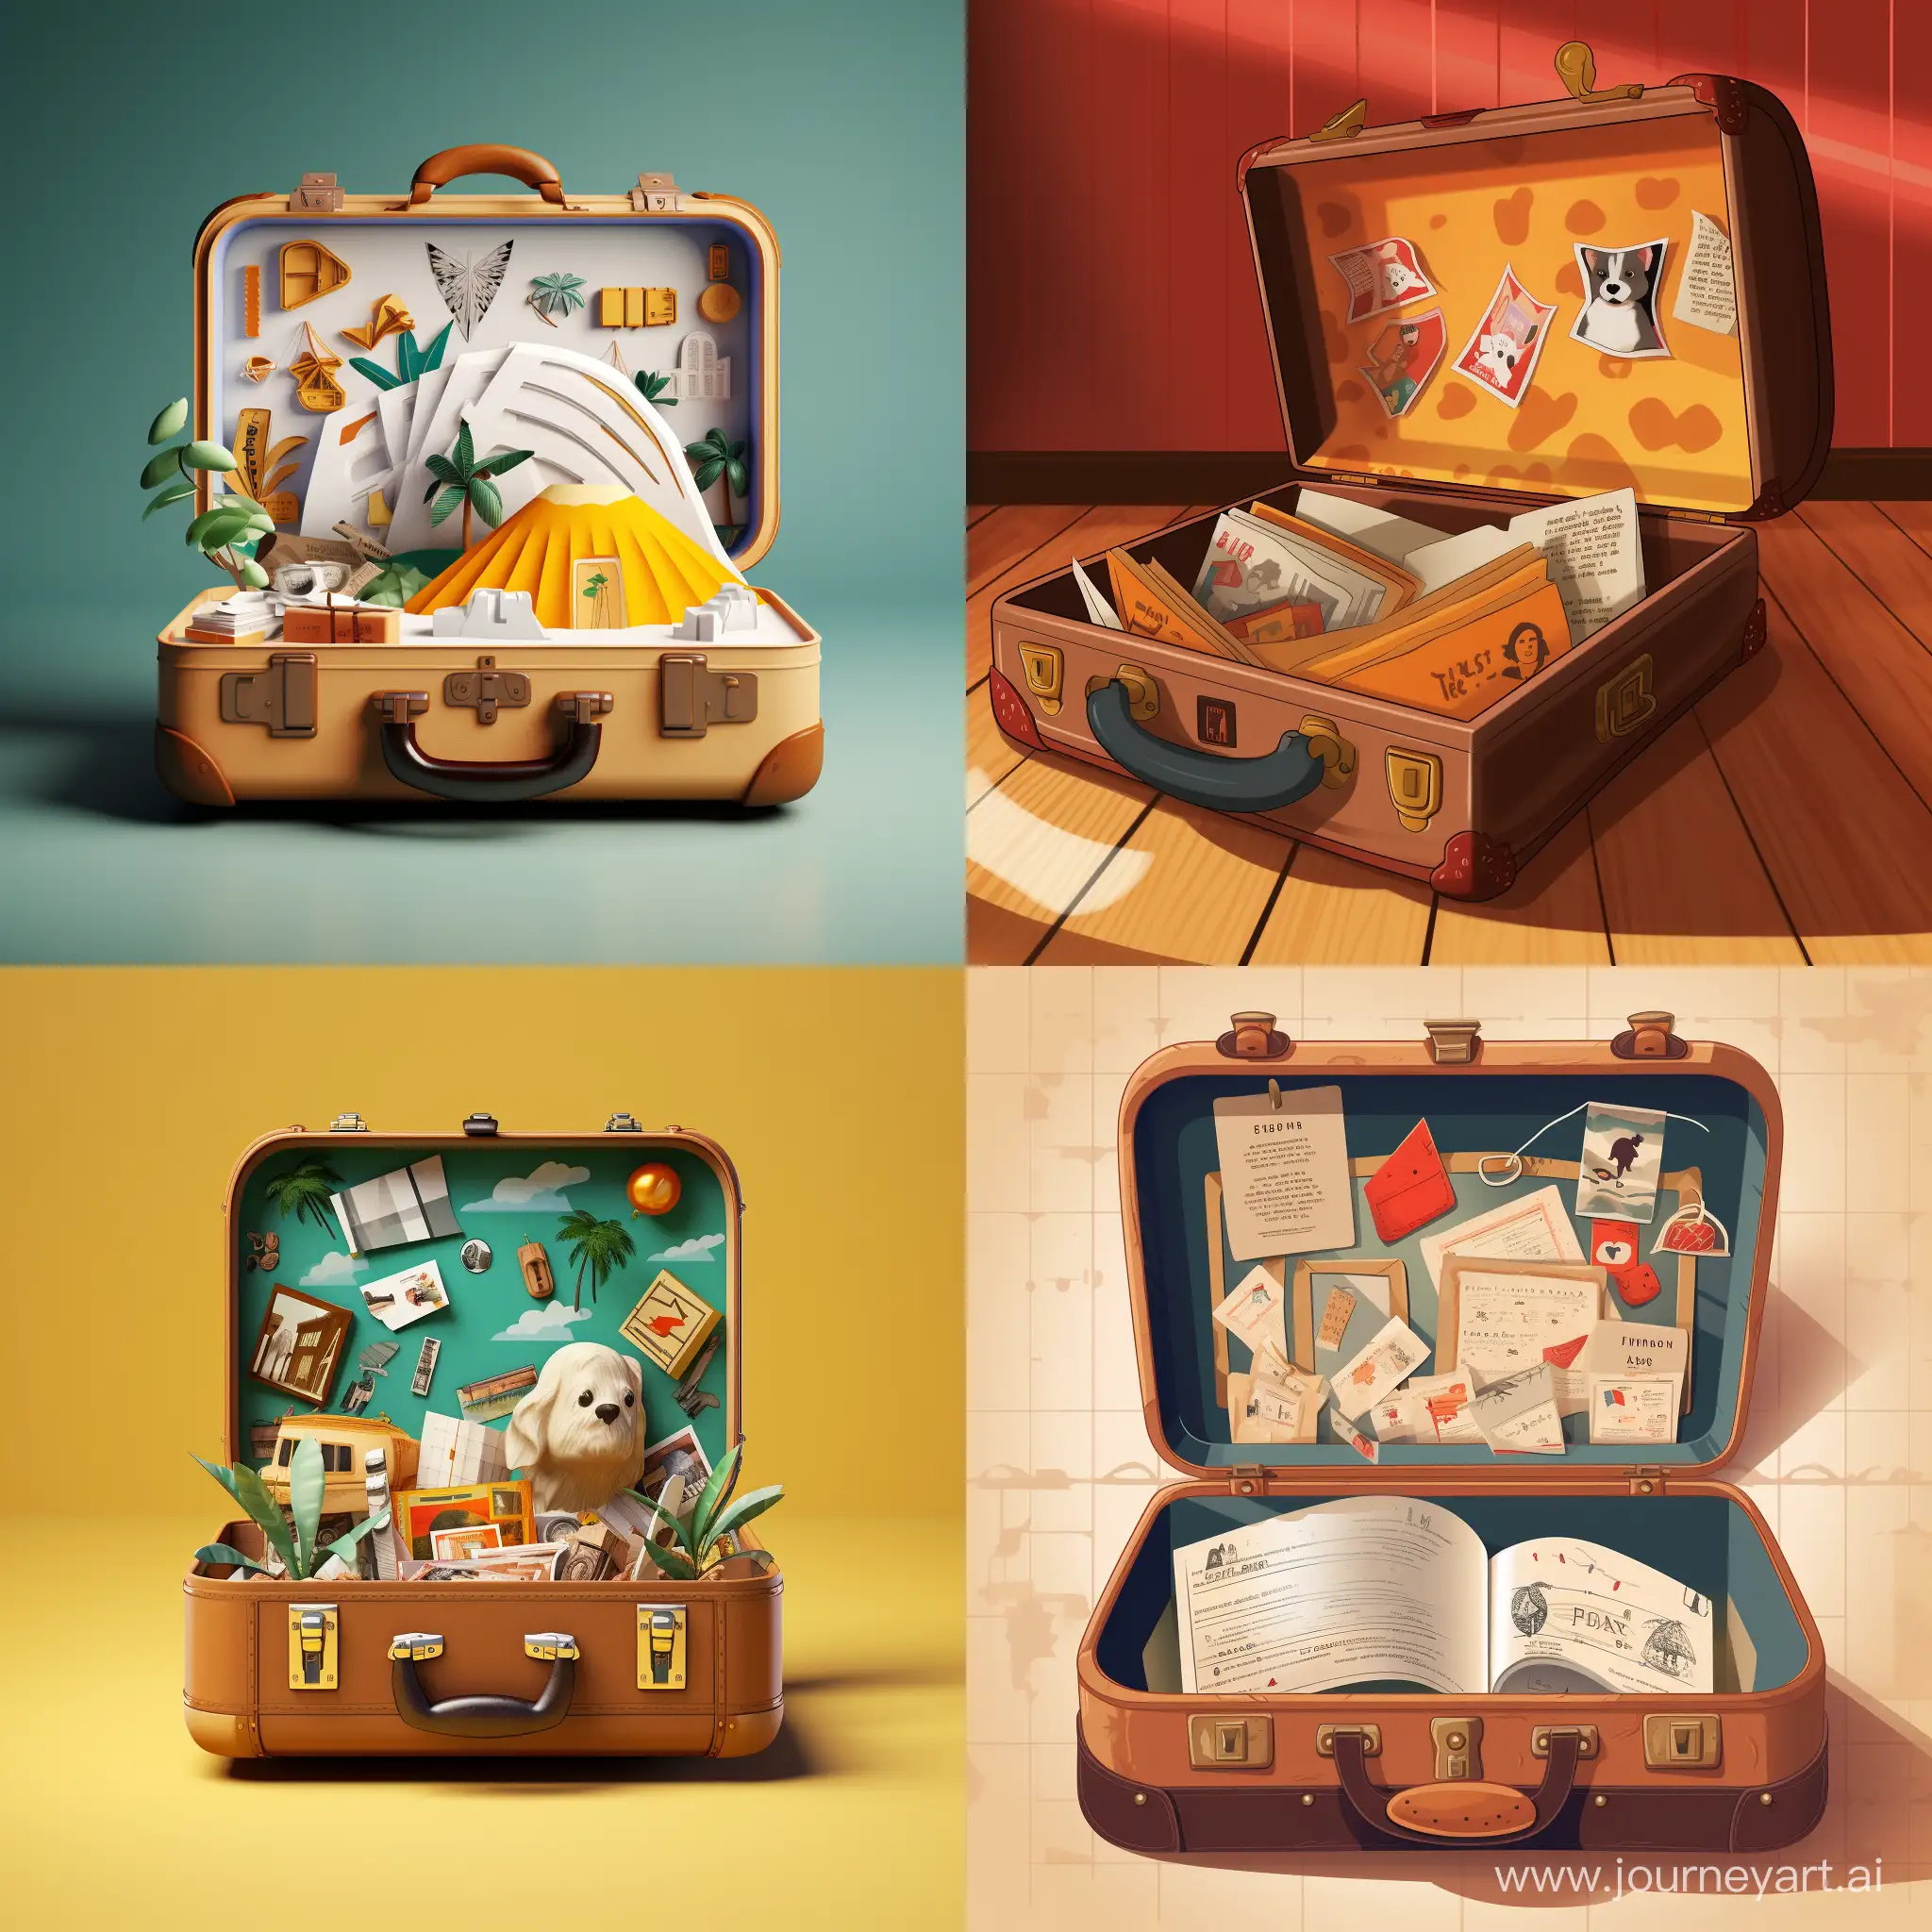 "Generate an image of an open suitcase with a large unfolded letter containing a message, stylized in the theme of pet travel. Let the suitcase have a travel-inspired appearance, and on the unfolded letter, incorporate details or illustrations related to pet travel, such as animal paw prints, cheerful depictions of pets, or symbols that convey an atmosphere of warmth and adventure."